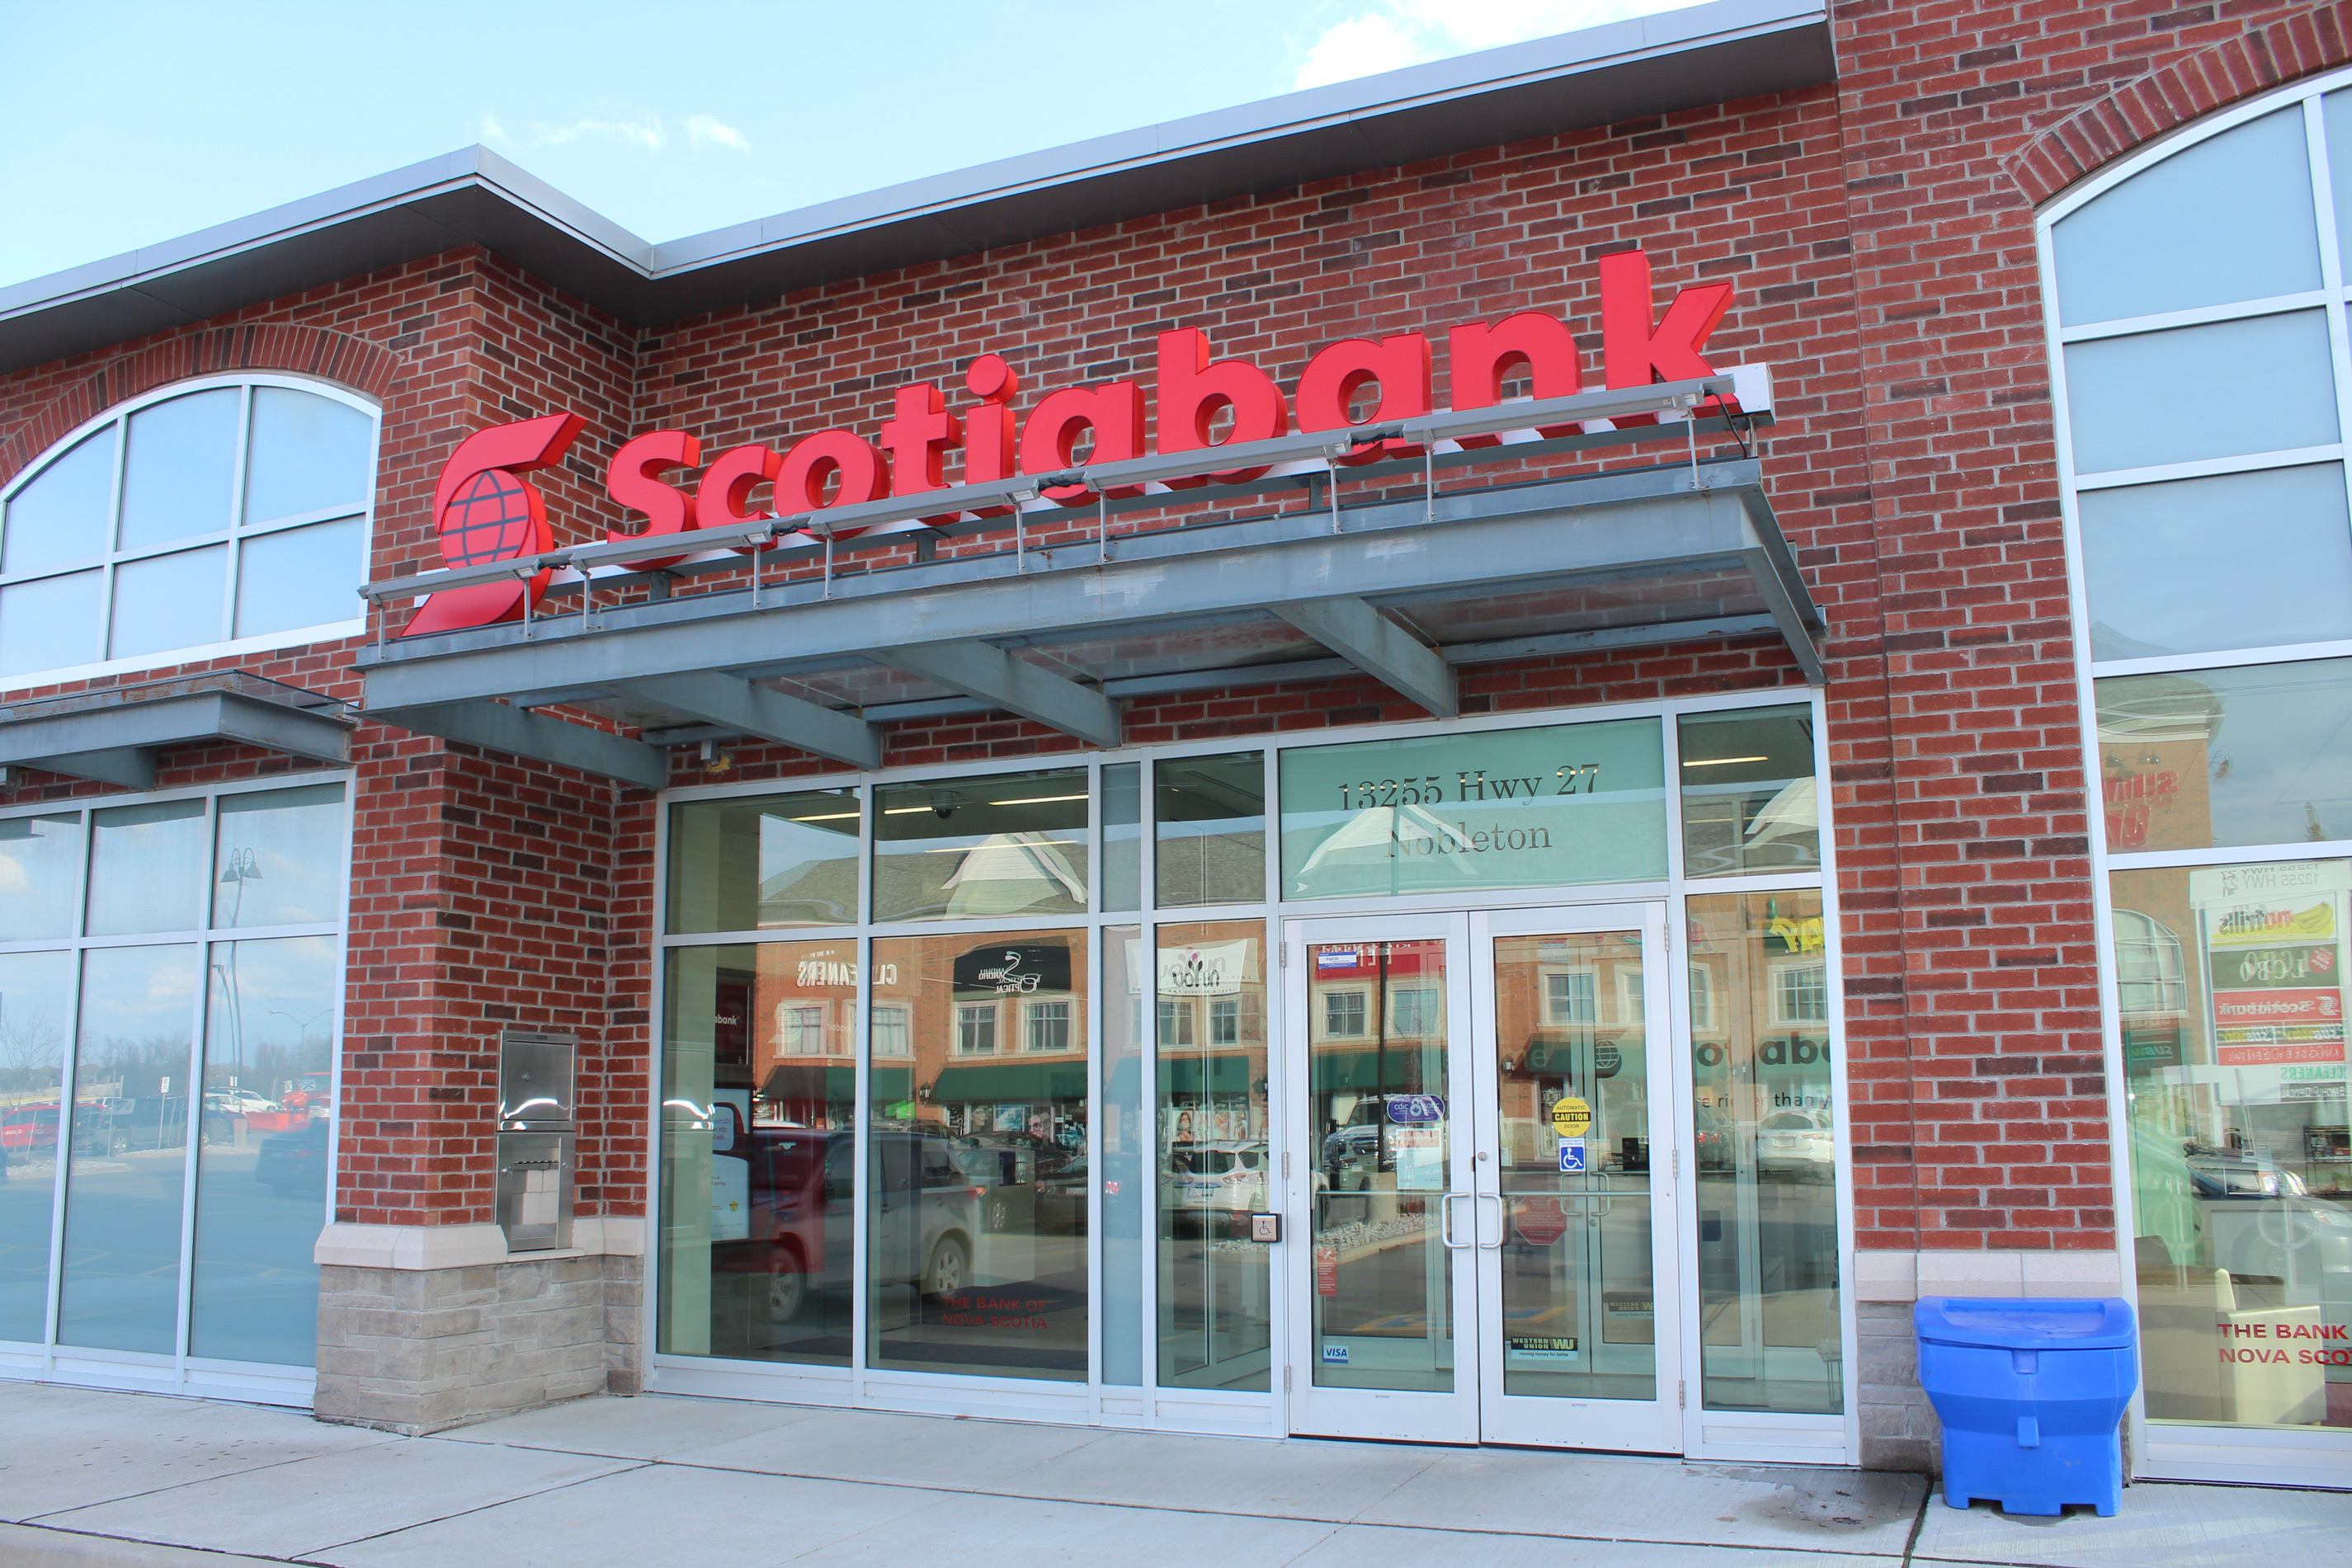 Entrance of Scotiabank building - Brick colour is Old School, Stone colour is Driftwood